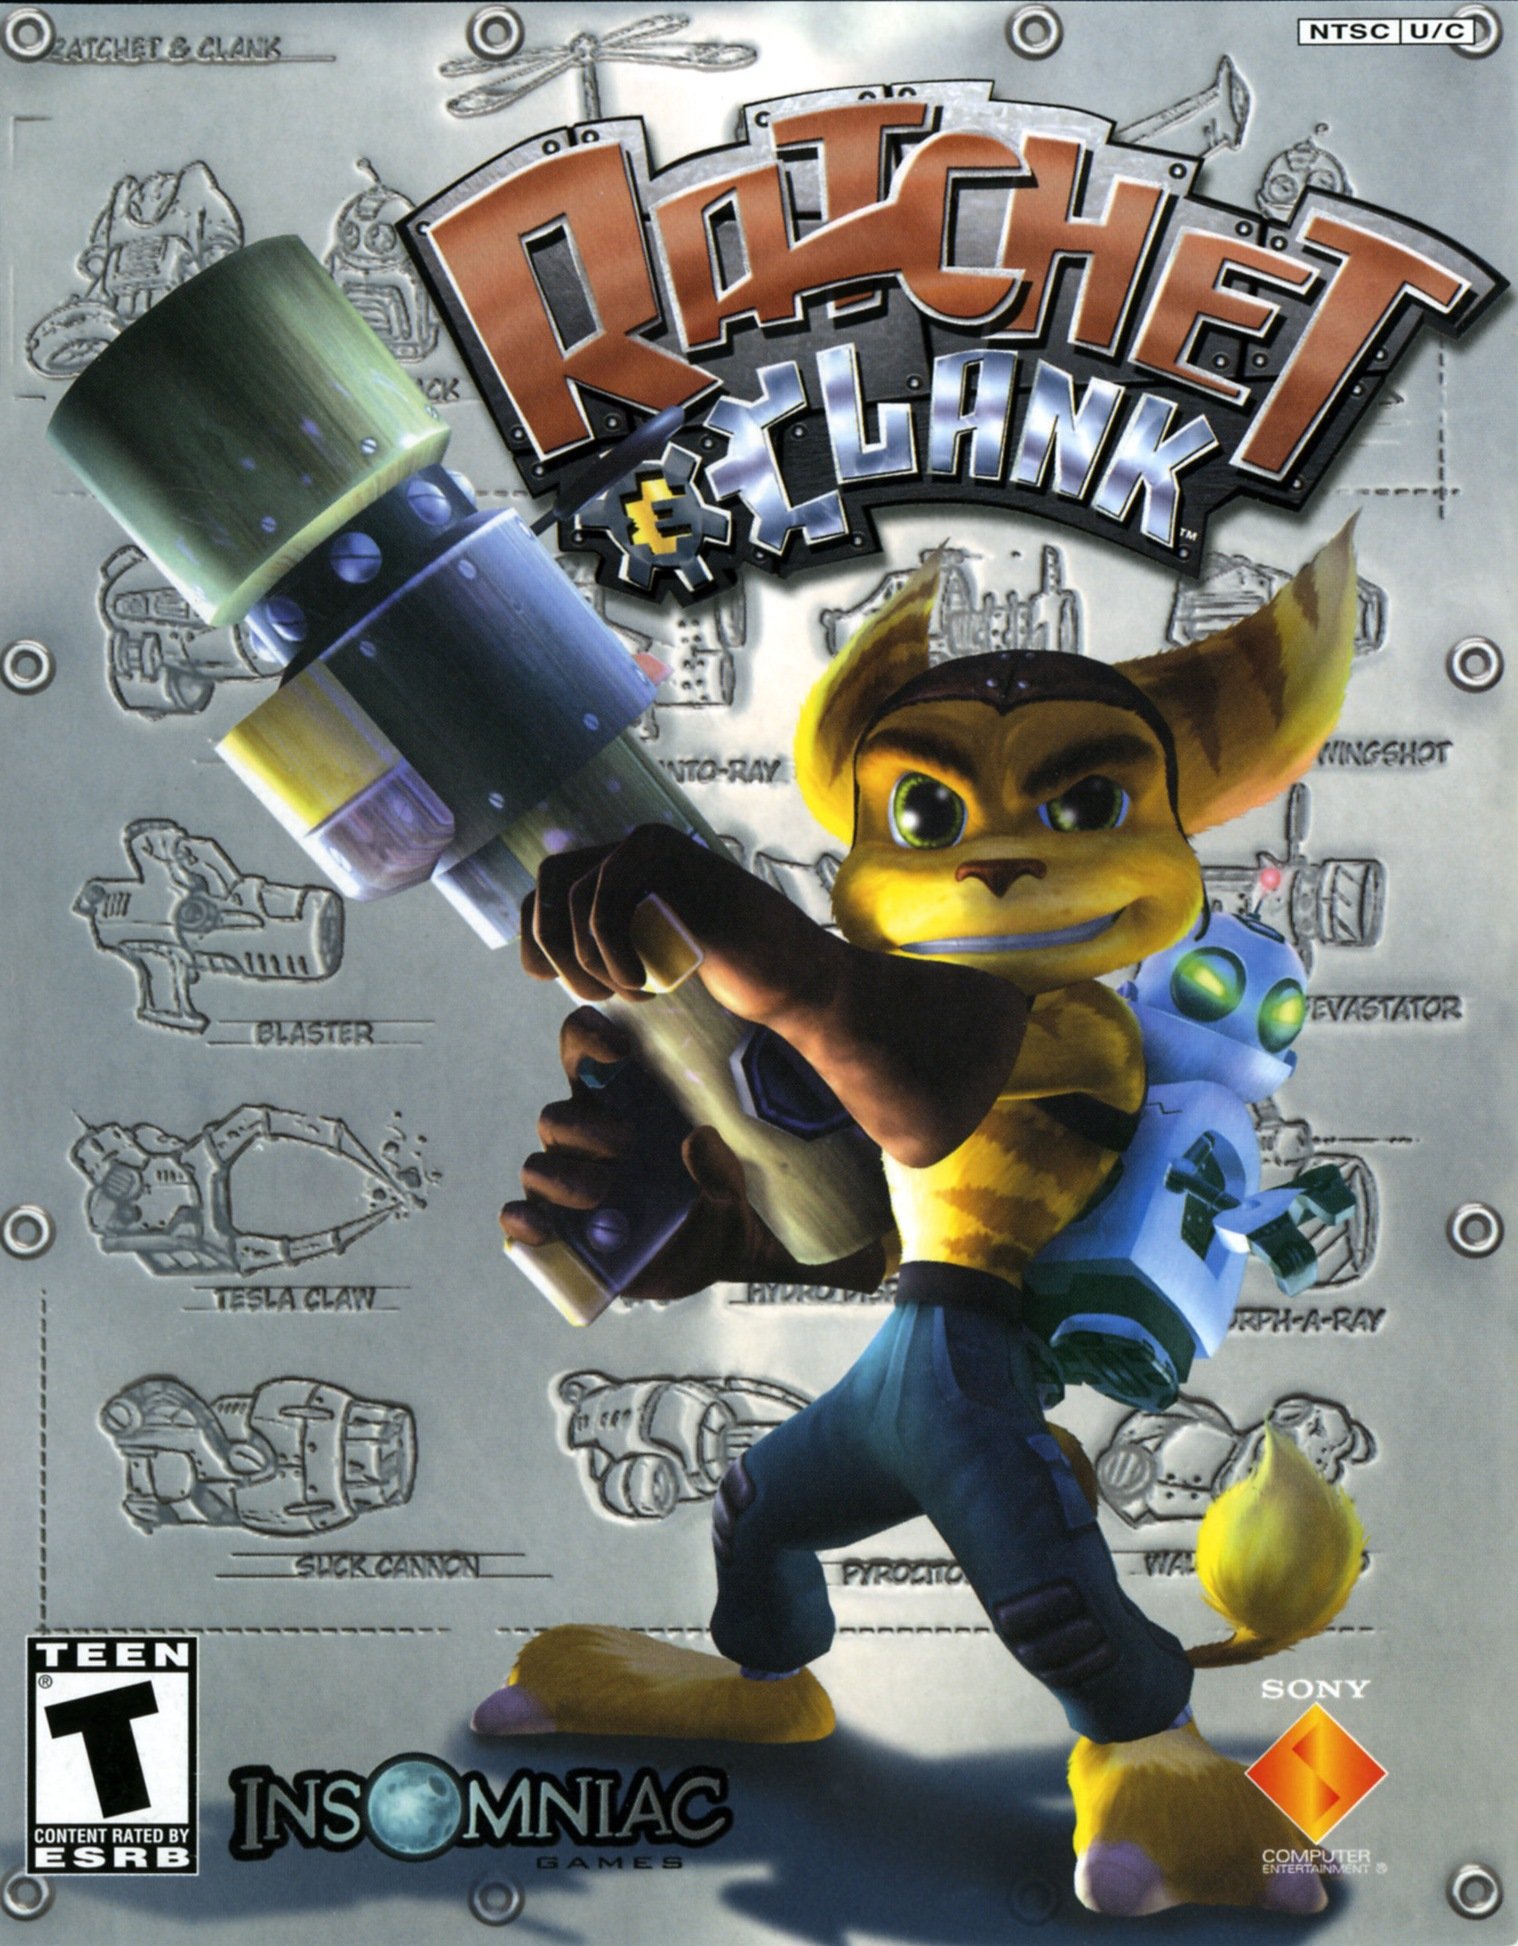 Image of Ratchet & Clank